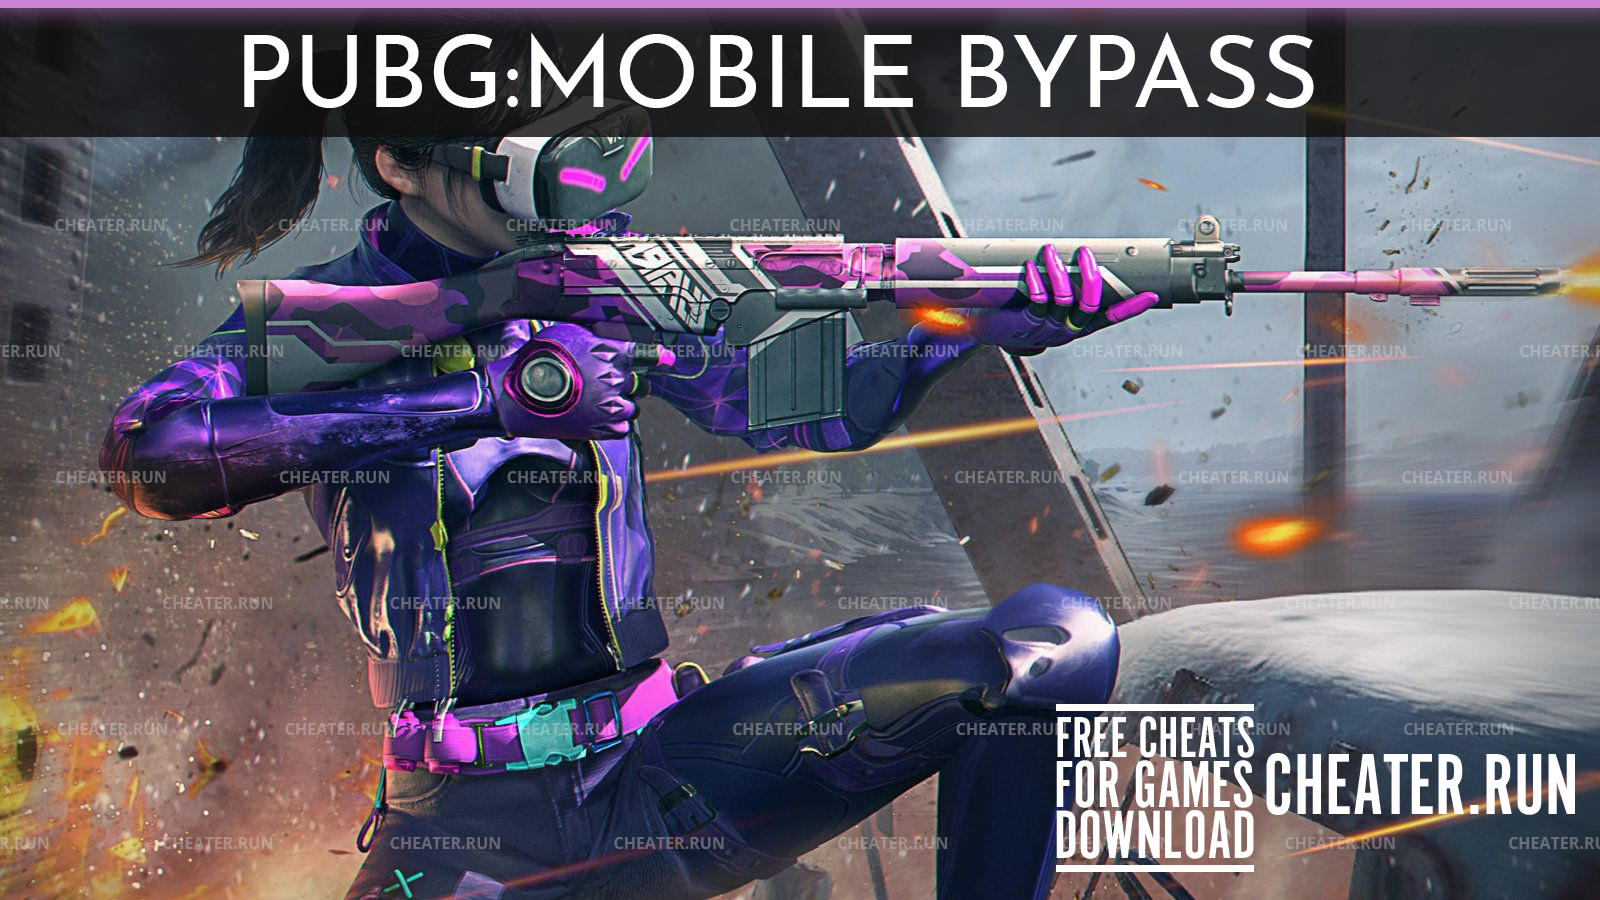 PUBG: Mobile Bypass